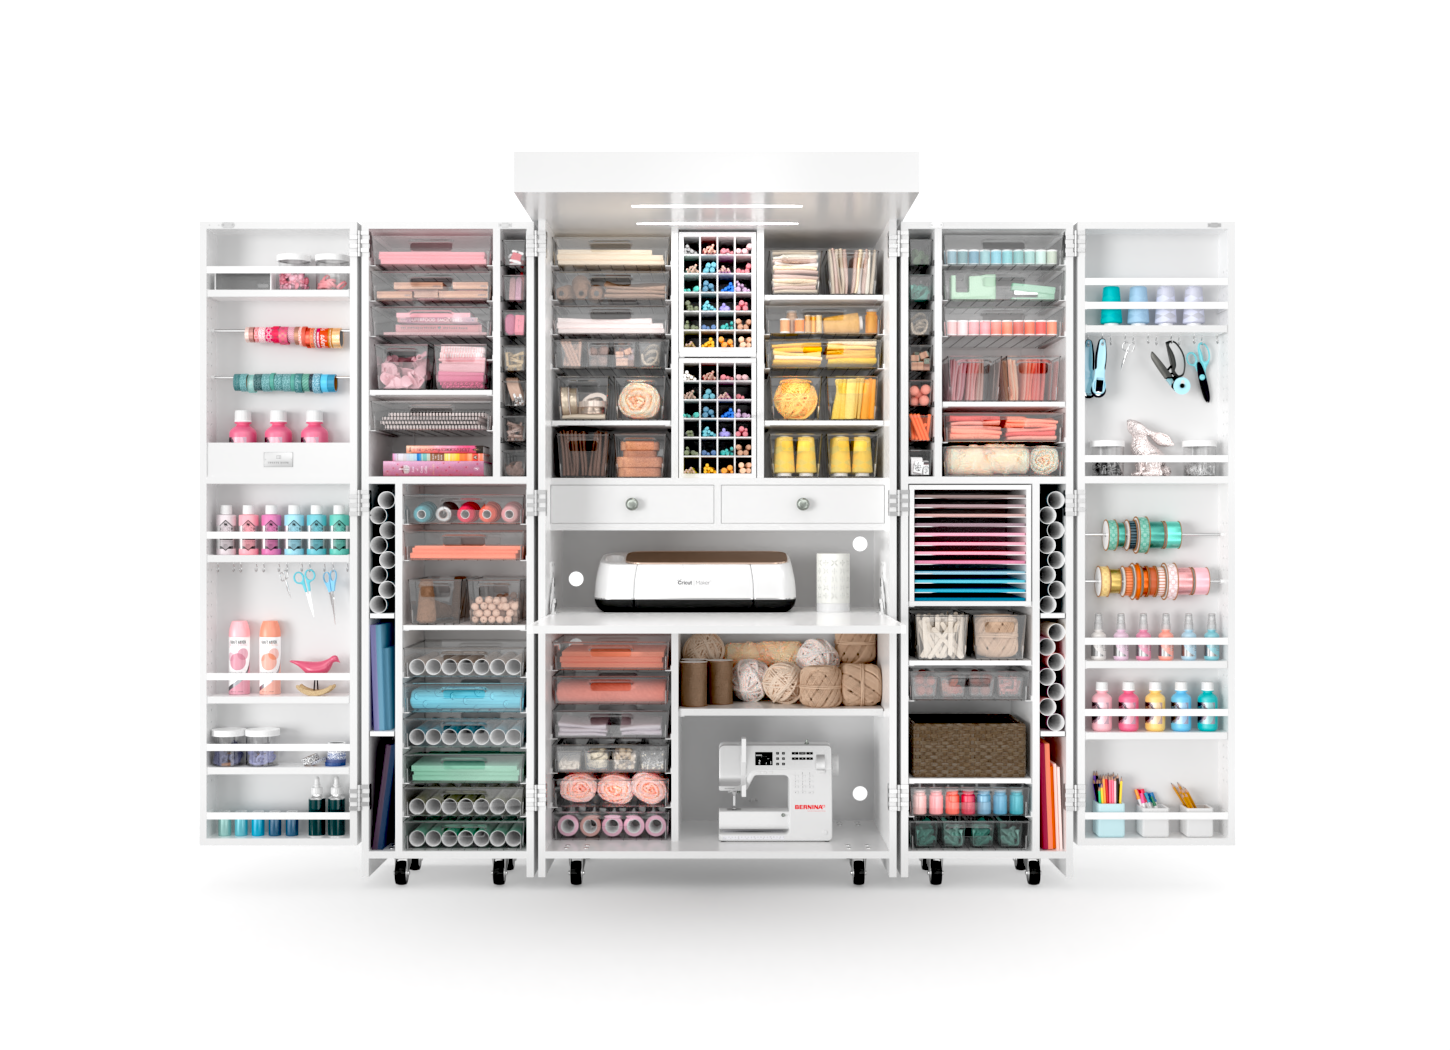 Go Vertical: Easy Space-Saving Acrylic Paint Storage  Dream craft room,  Craft room storage, Acrylic paint storage